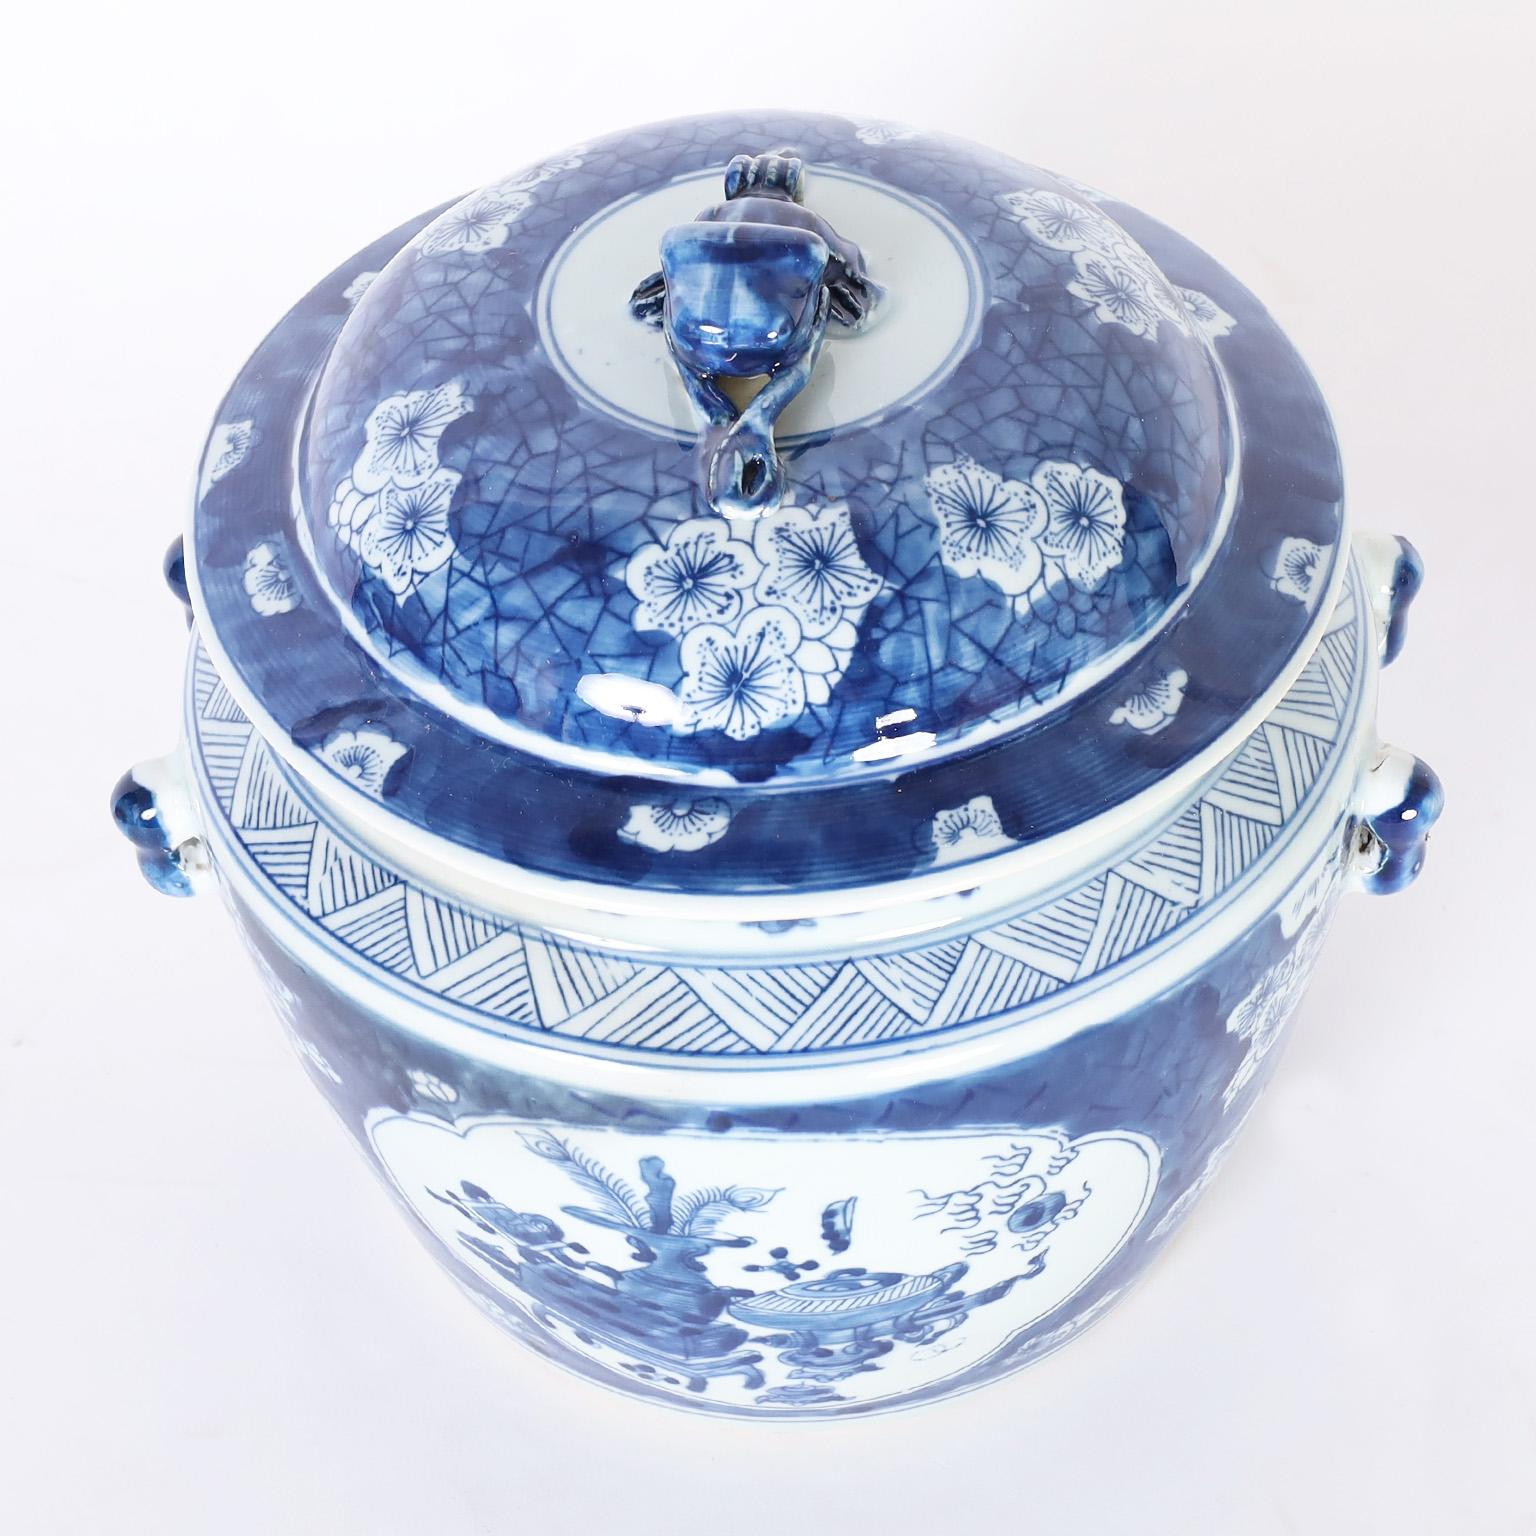 Chinese Export Pair of Blue and White Porcelain Lidded Pots